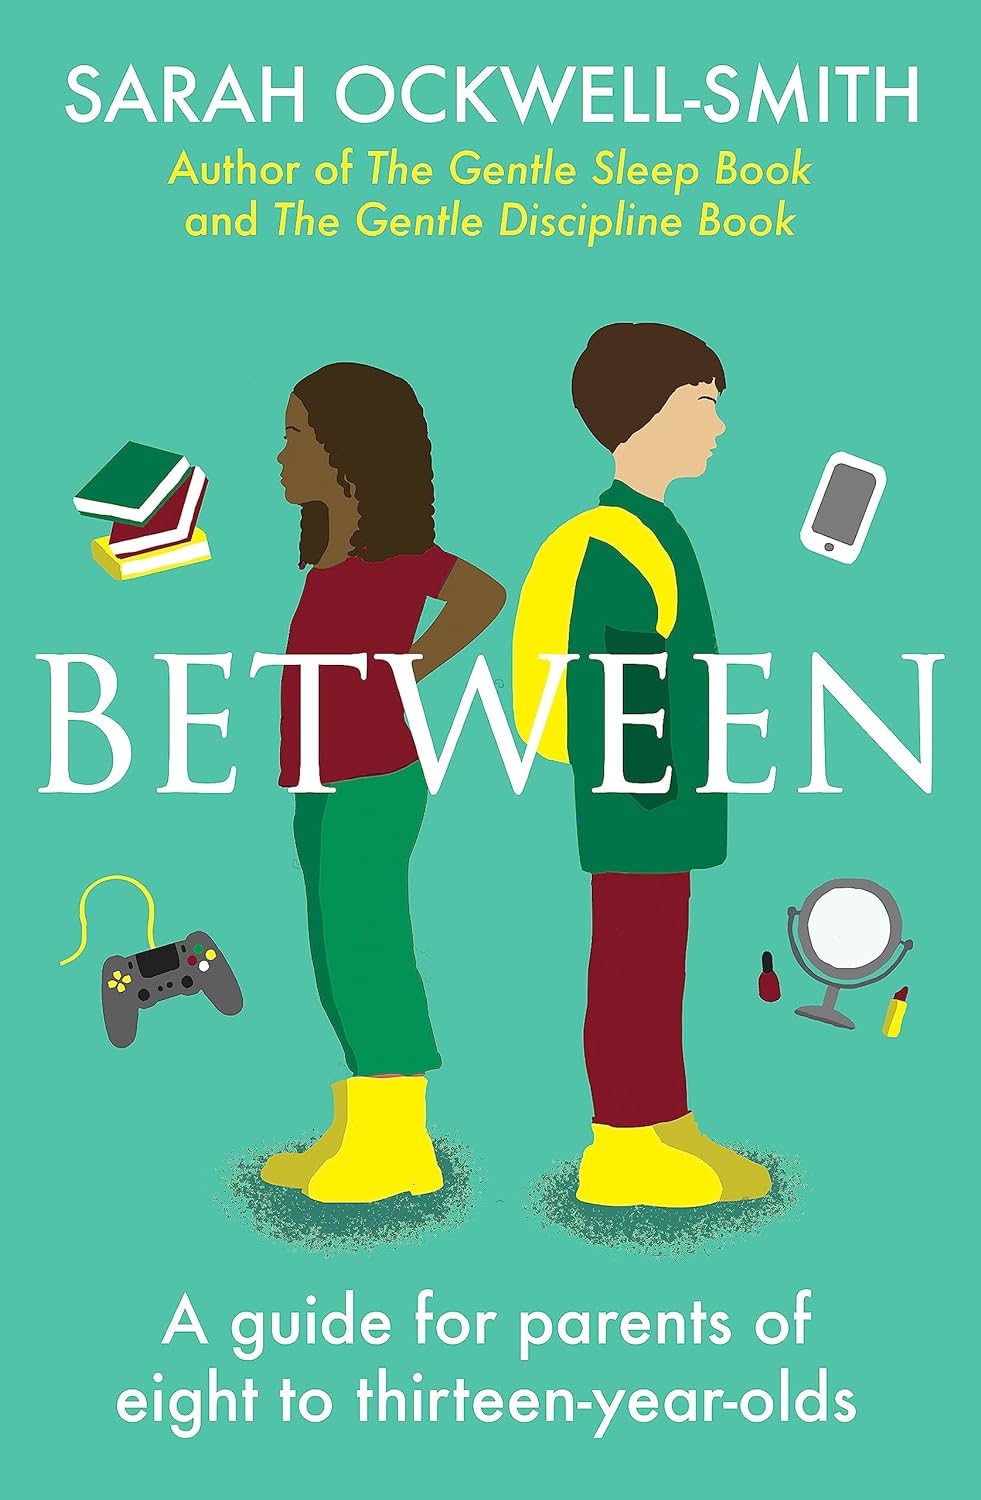 Publisher:Little, Brown Book Group - Between - Sarah Ockwell-Smith